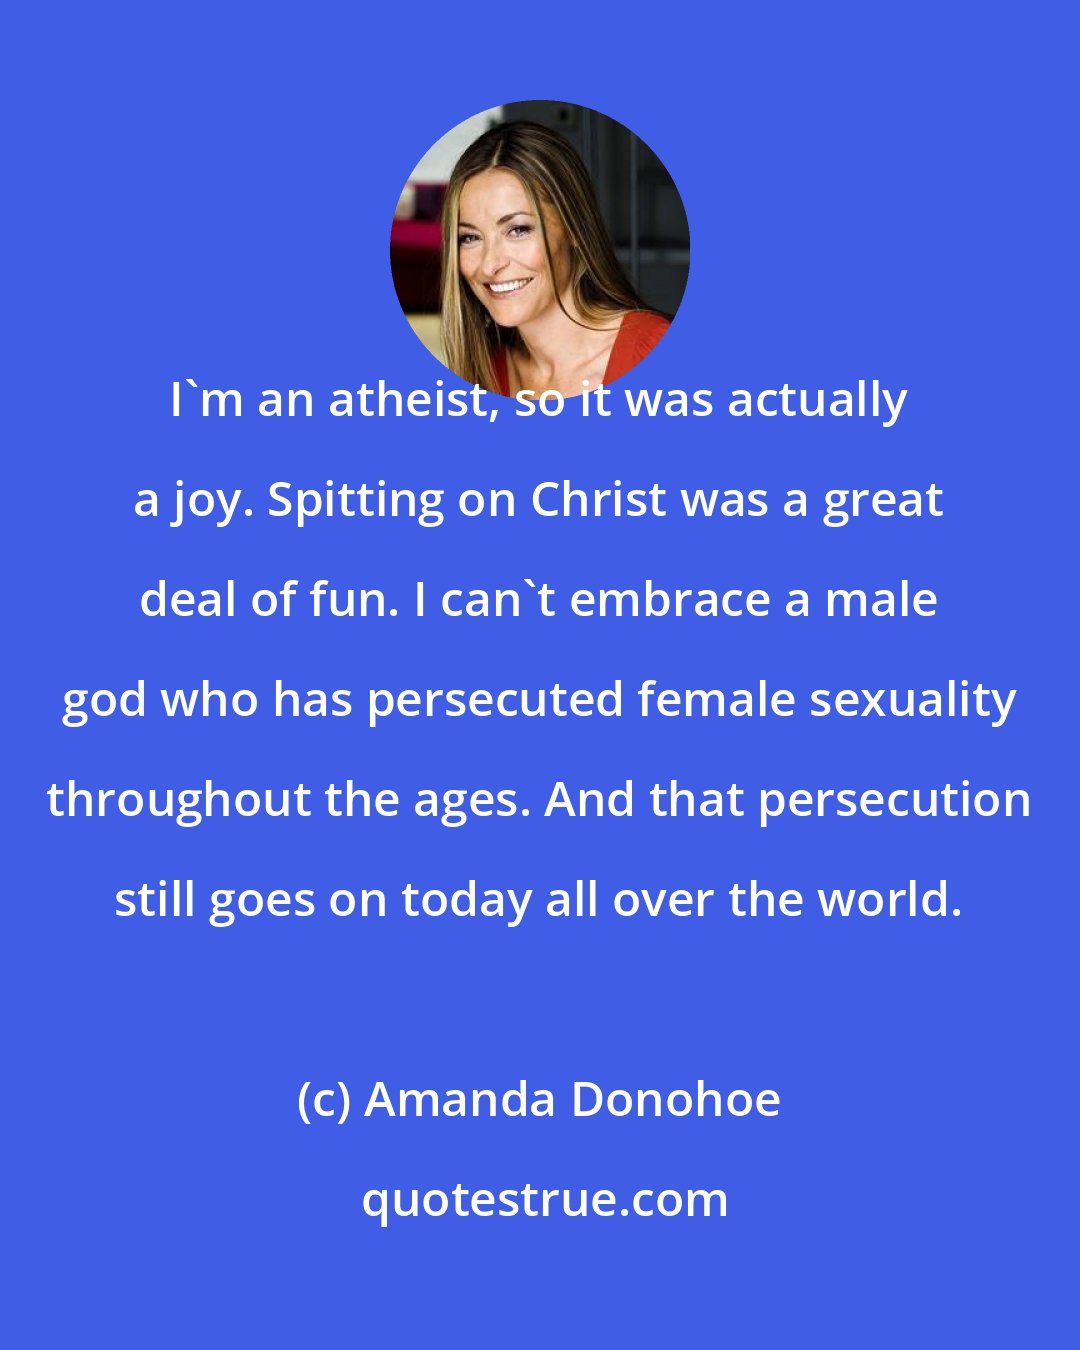 Amanda Donohoe: I'm an atheist, so it was actually a joy. Spitting on Christ was a great deal of fun. I can't embrace a male god who has persecuted female sexuality throughout the ages. And that persecution still goes on today all over the world.